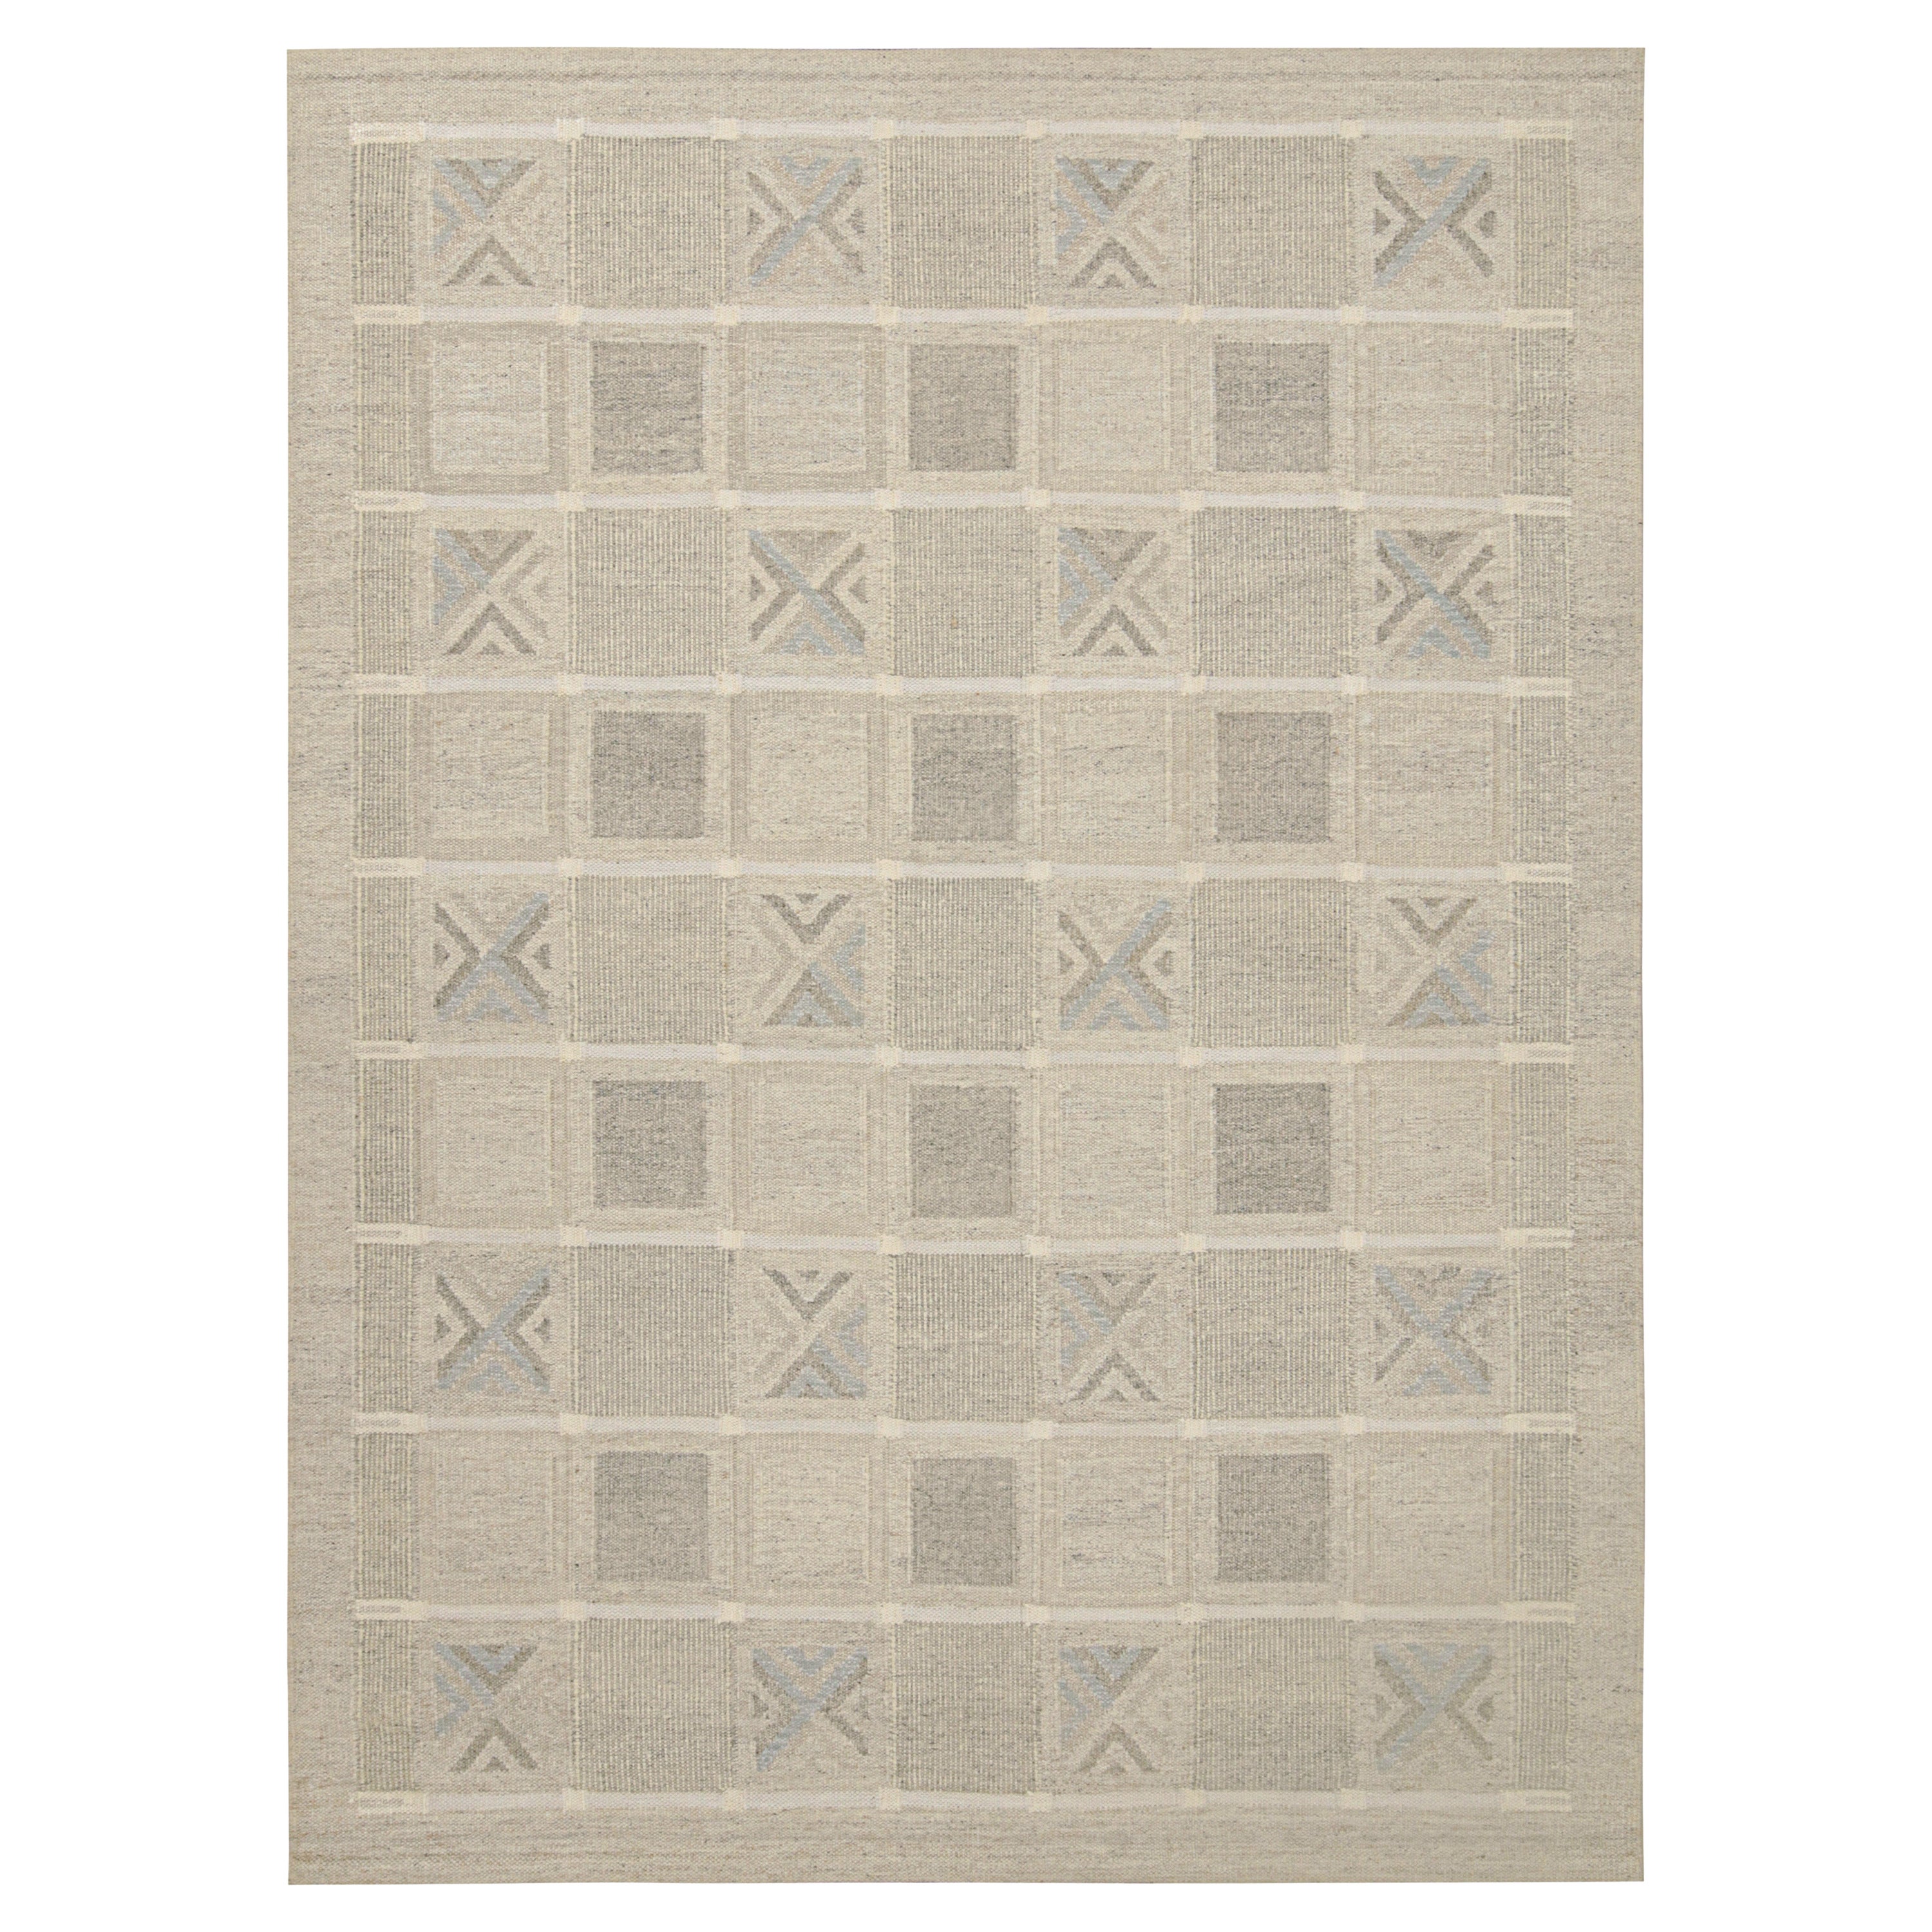 Rug & Kilim’s Scandinavian Style Kilim with Beige and Gray Geometric Patterns